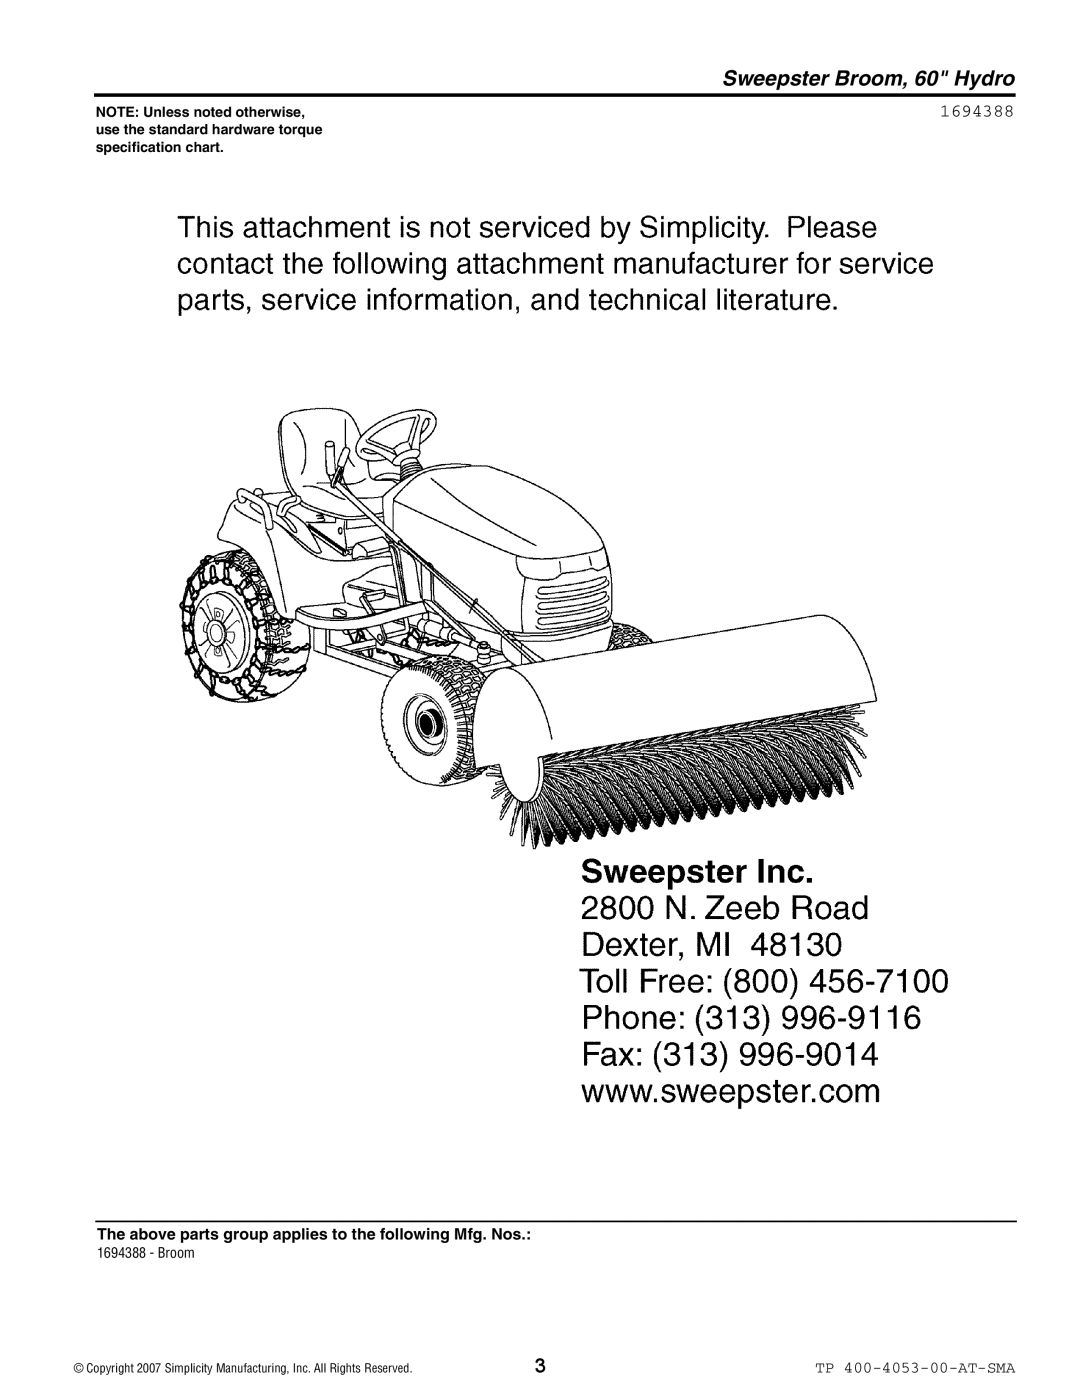 Snapper 4053 Sweepster Broom, 60 Hydro, NOTE Unless noted otherwise, use the standard hardware torque, specification chart 